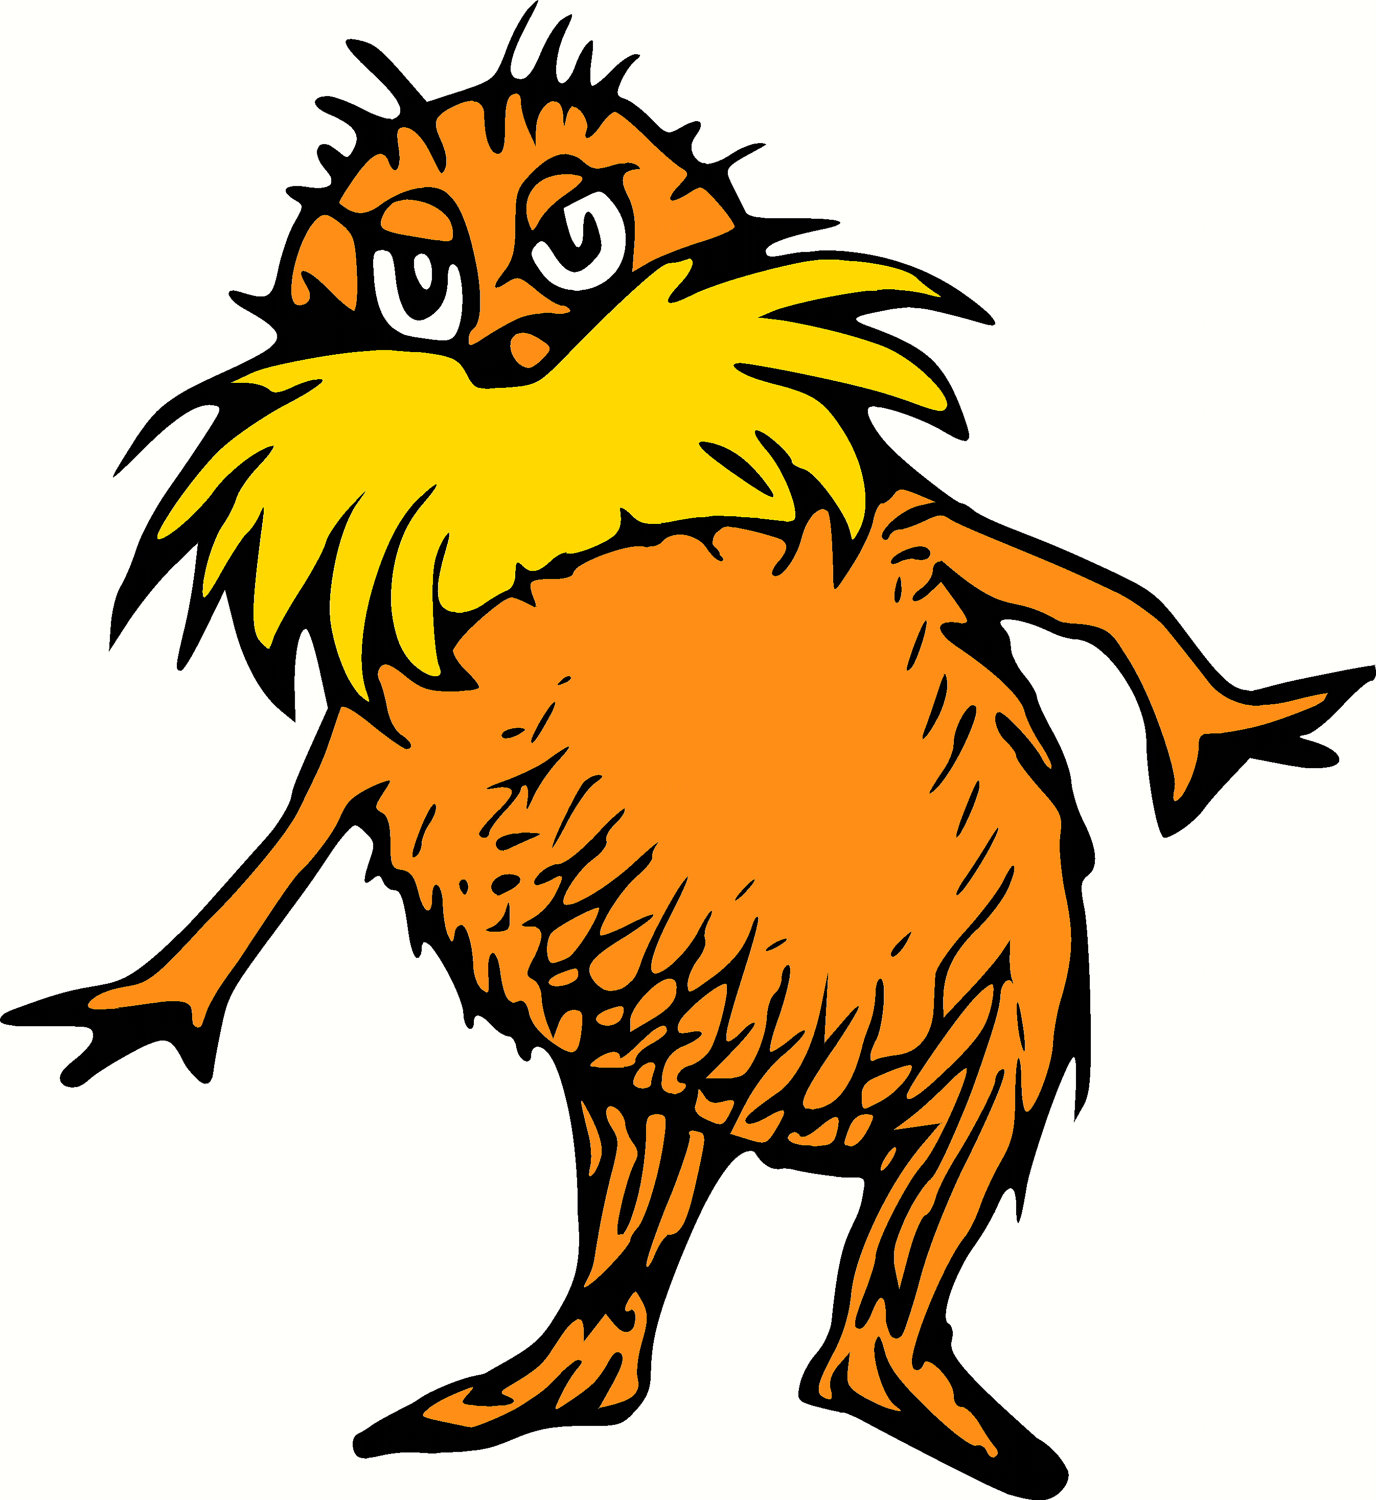 The lorax clipart